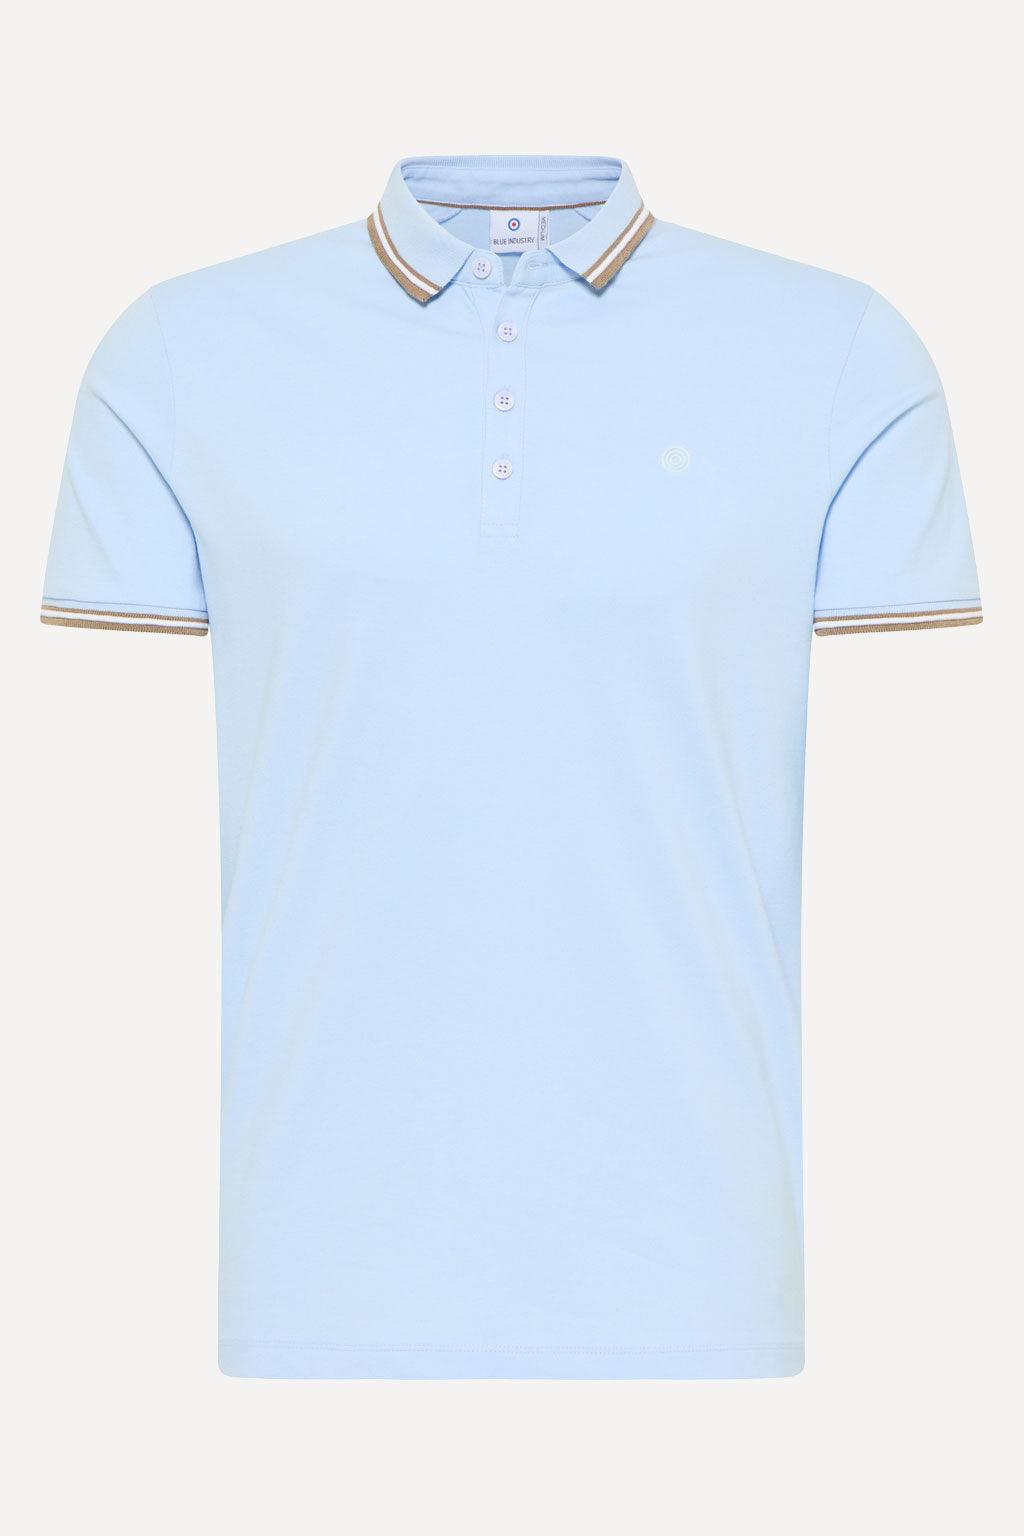 Blue Industry polo - Big Boss | the menswear concept